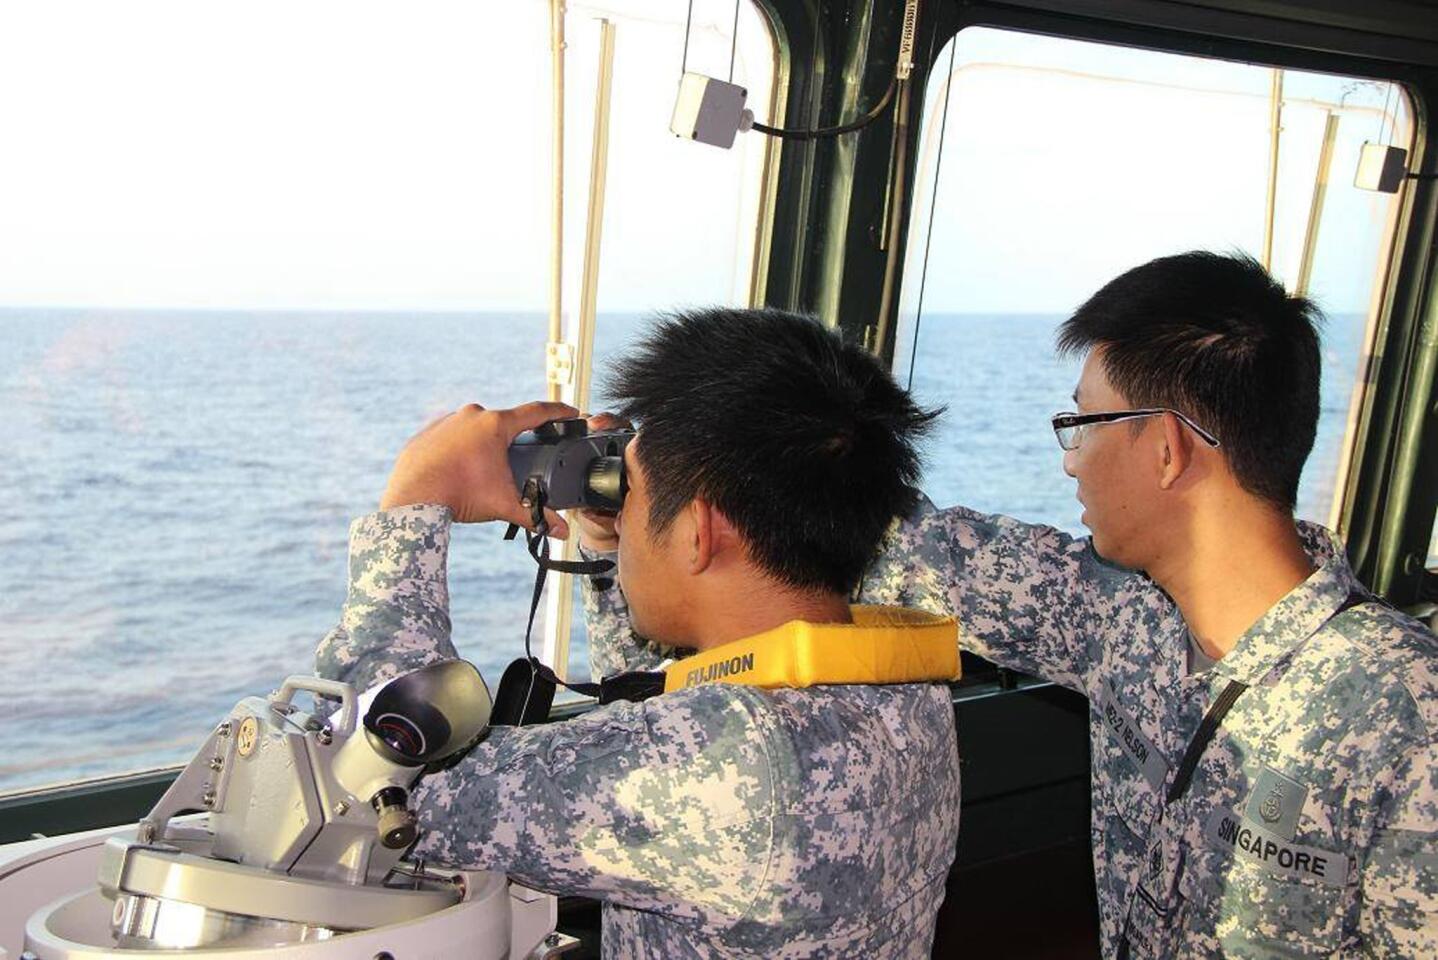 Navy personnel participating in the search and rescue operations, approximately 380 nautical miles (700 kms) north of Singapore, in the South China Sea for the missing Malaysia Airlines flight MH370.